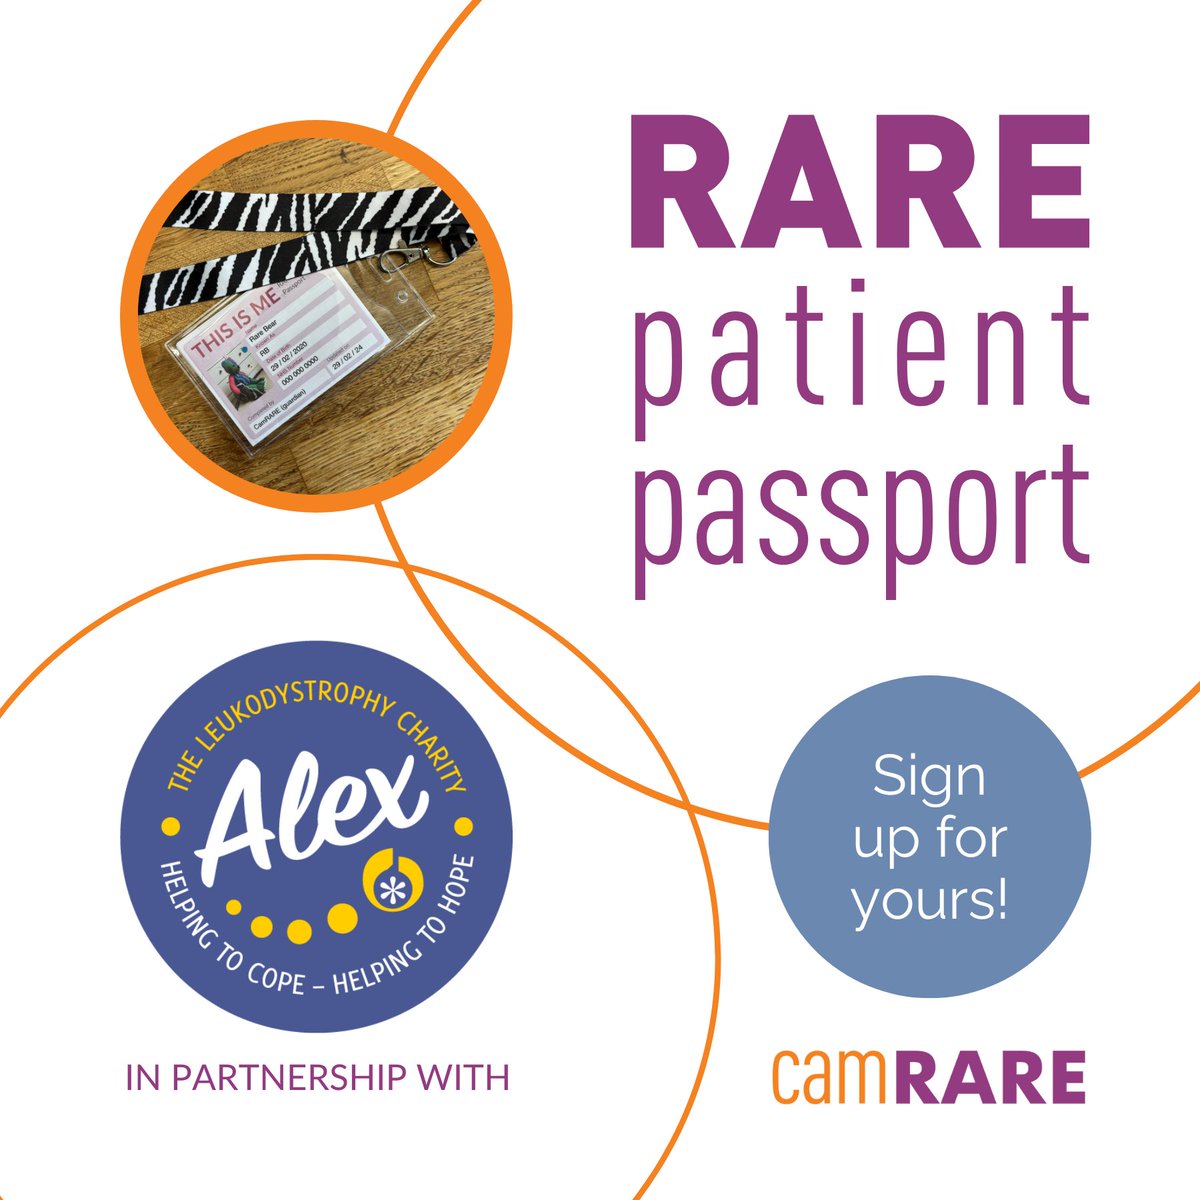 We're delighted to join the growing global network of patient groups partnering with @camraredisease to bring their ‘This Is Me’ #RarePatientPassport to our community! The tools to communicate your #RareCondition to new people! Sign up for yours here: forms.gle/ggp9afsaH8p8Ez…